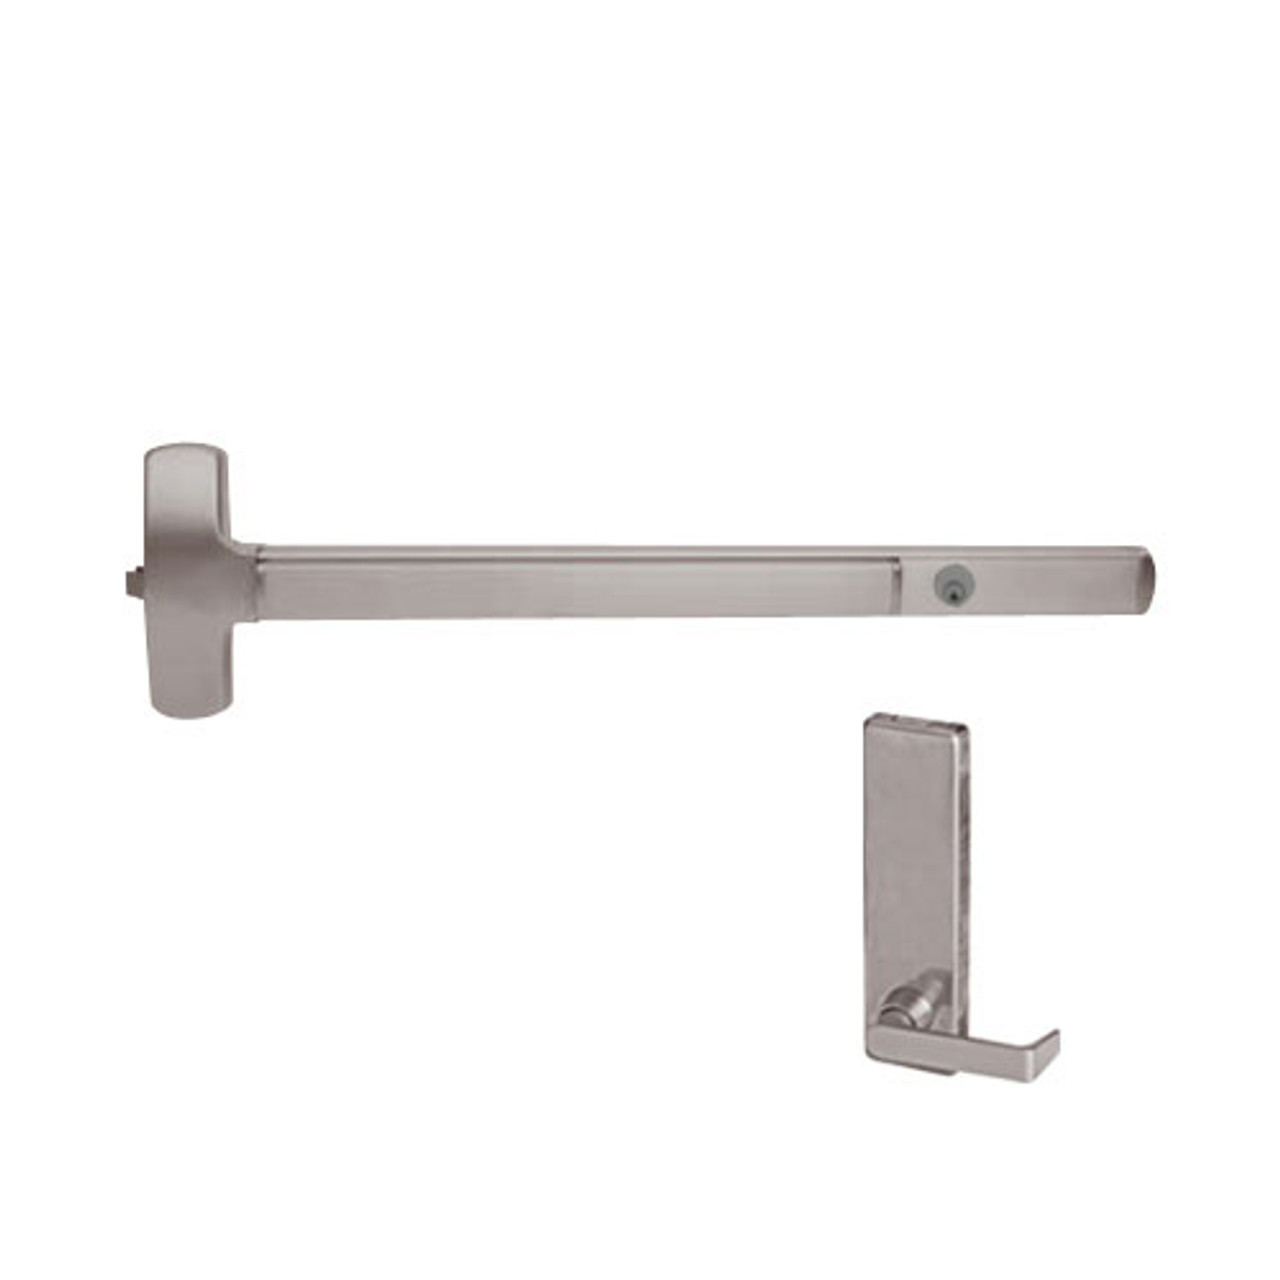 CD25-R-L-BE-DANE-US28-4-LHR Falcon Exit Device in Anodized Aluminum